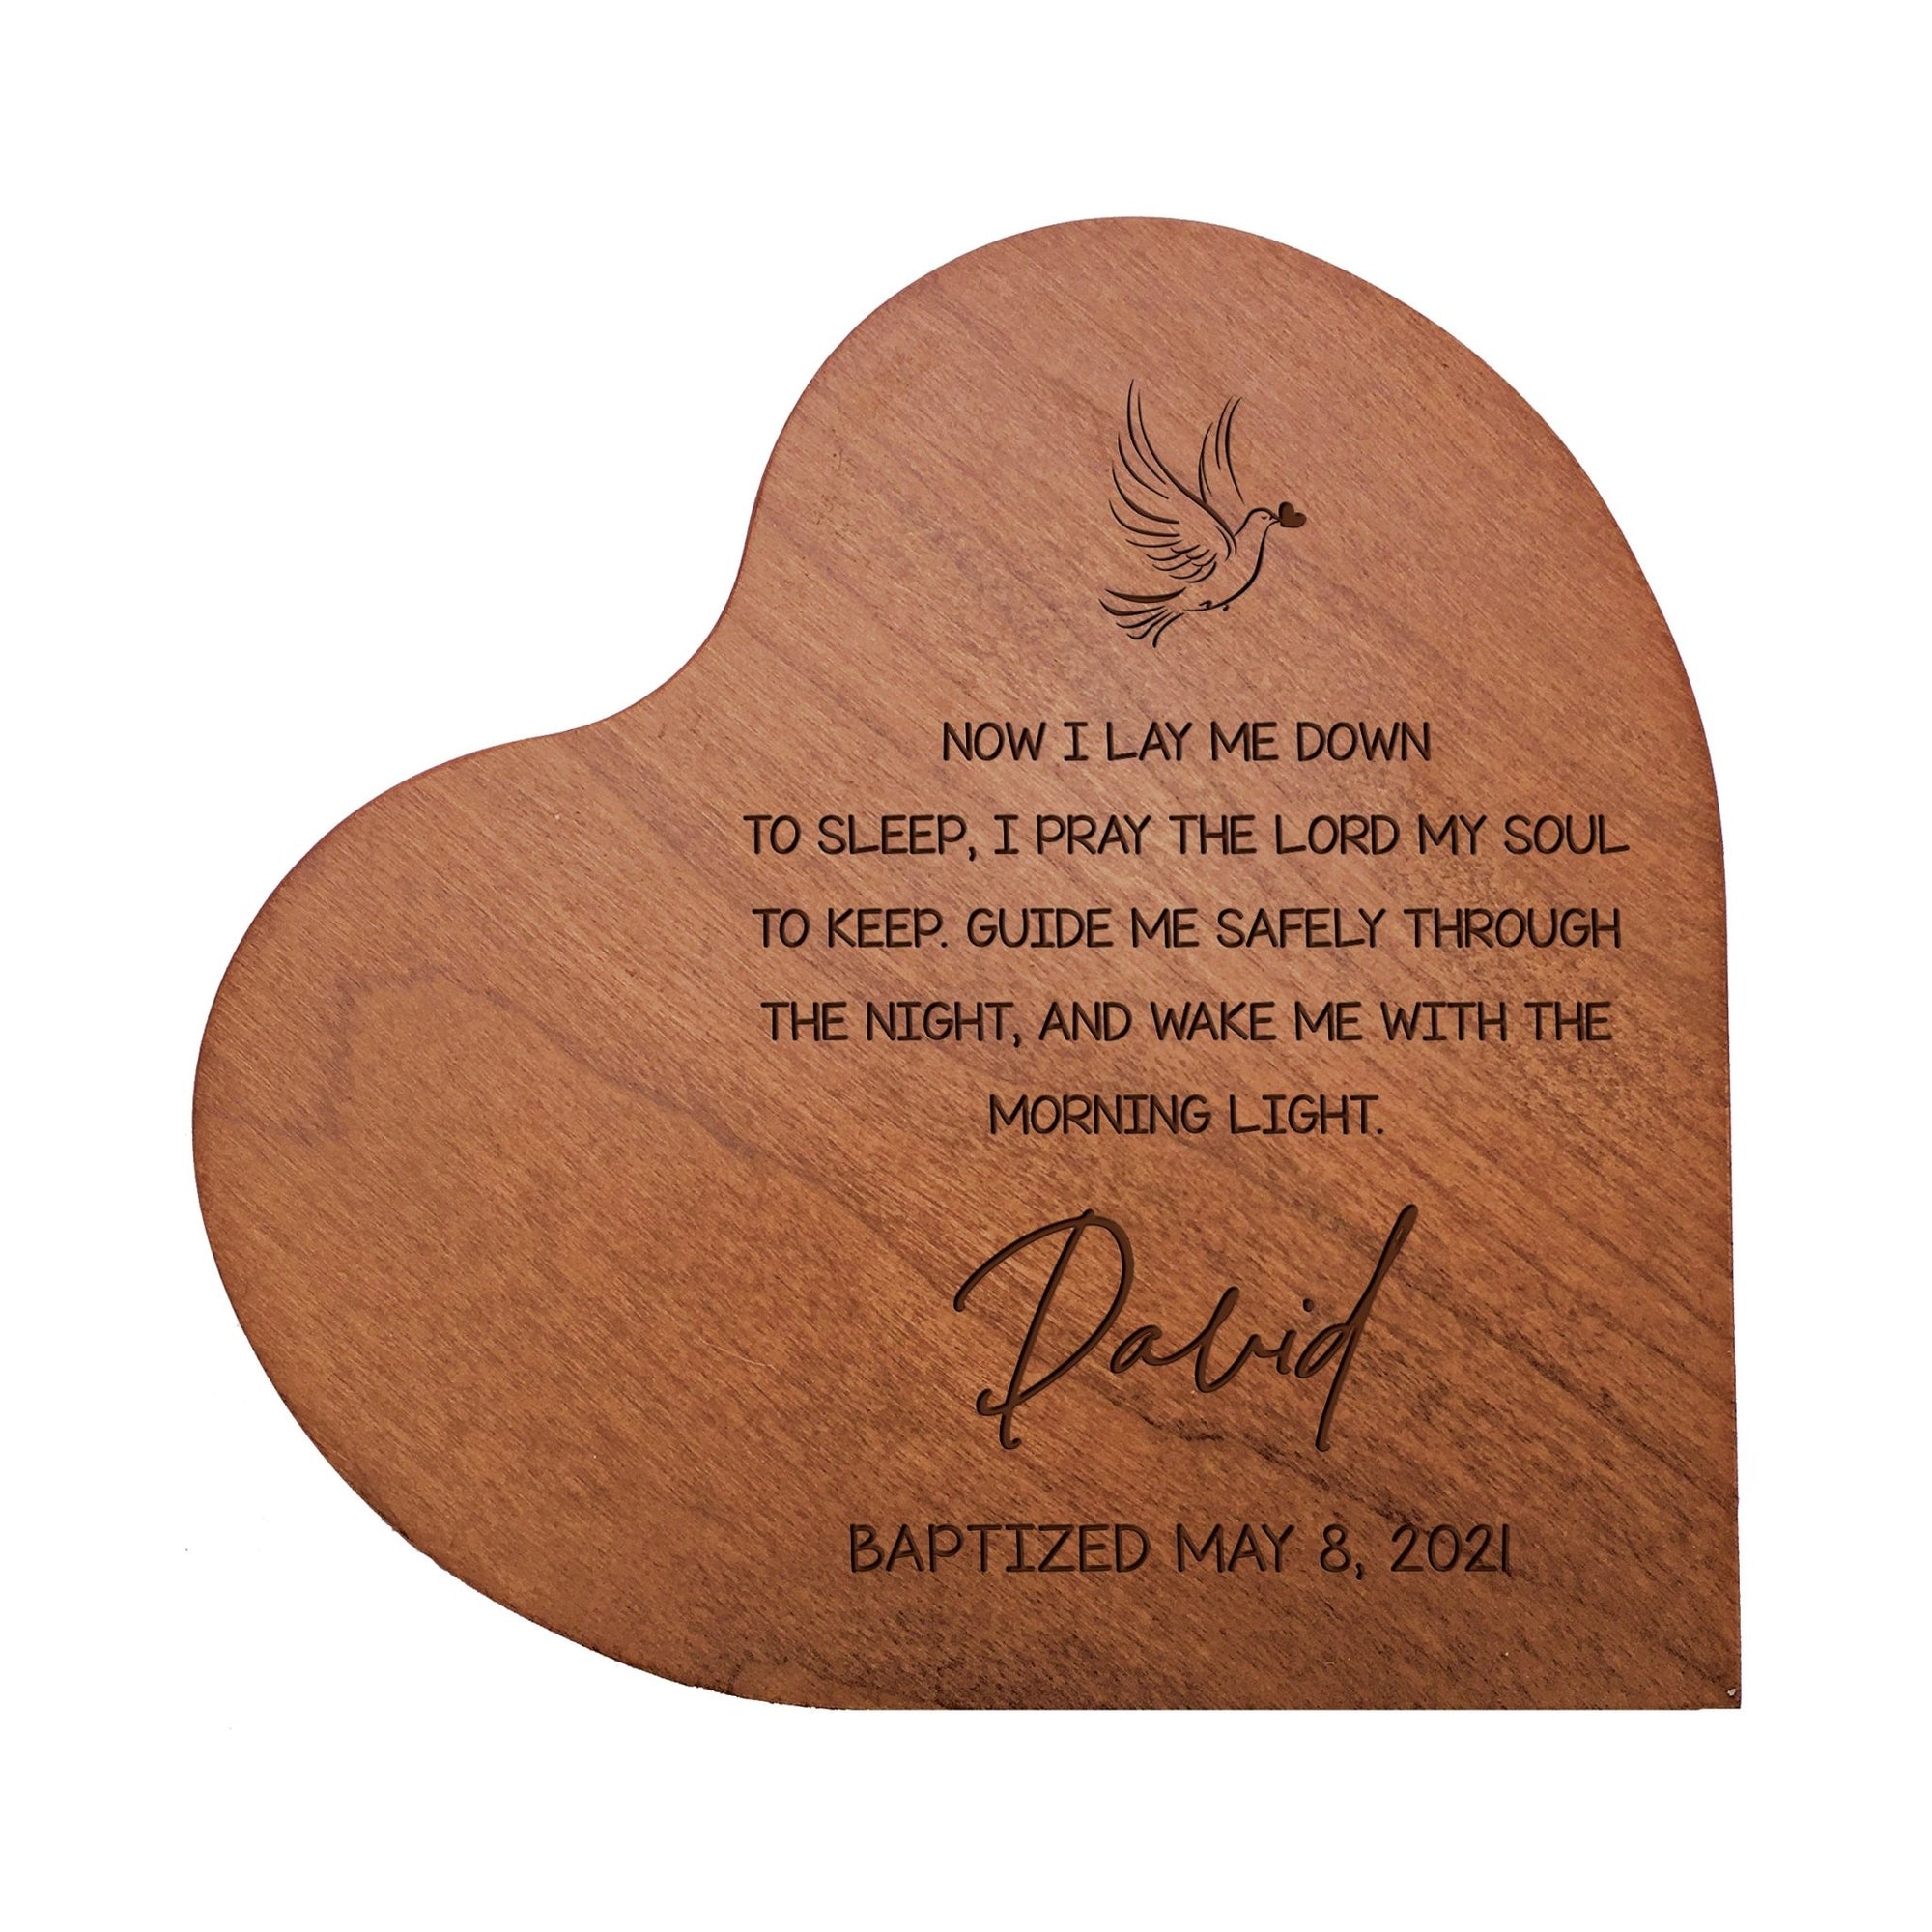 Personalized Baptism Solid Wood Heart Decoration With Inspirational Verse Keepsake Gift 5x5.25 - Now I Lay Down - LifeSong Milestones